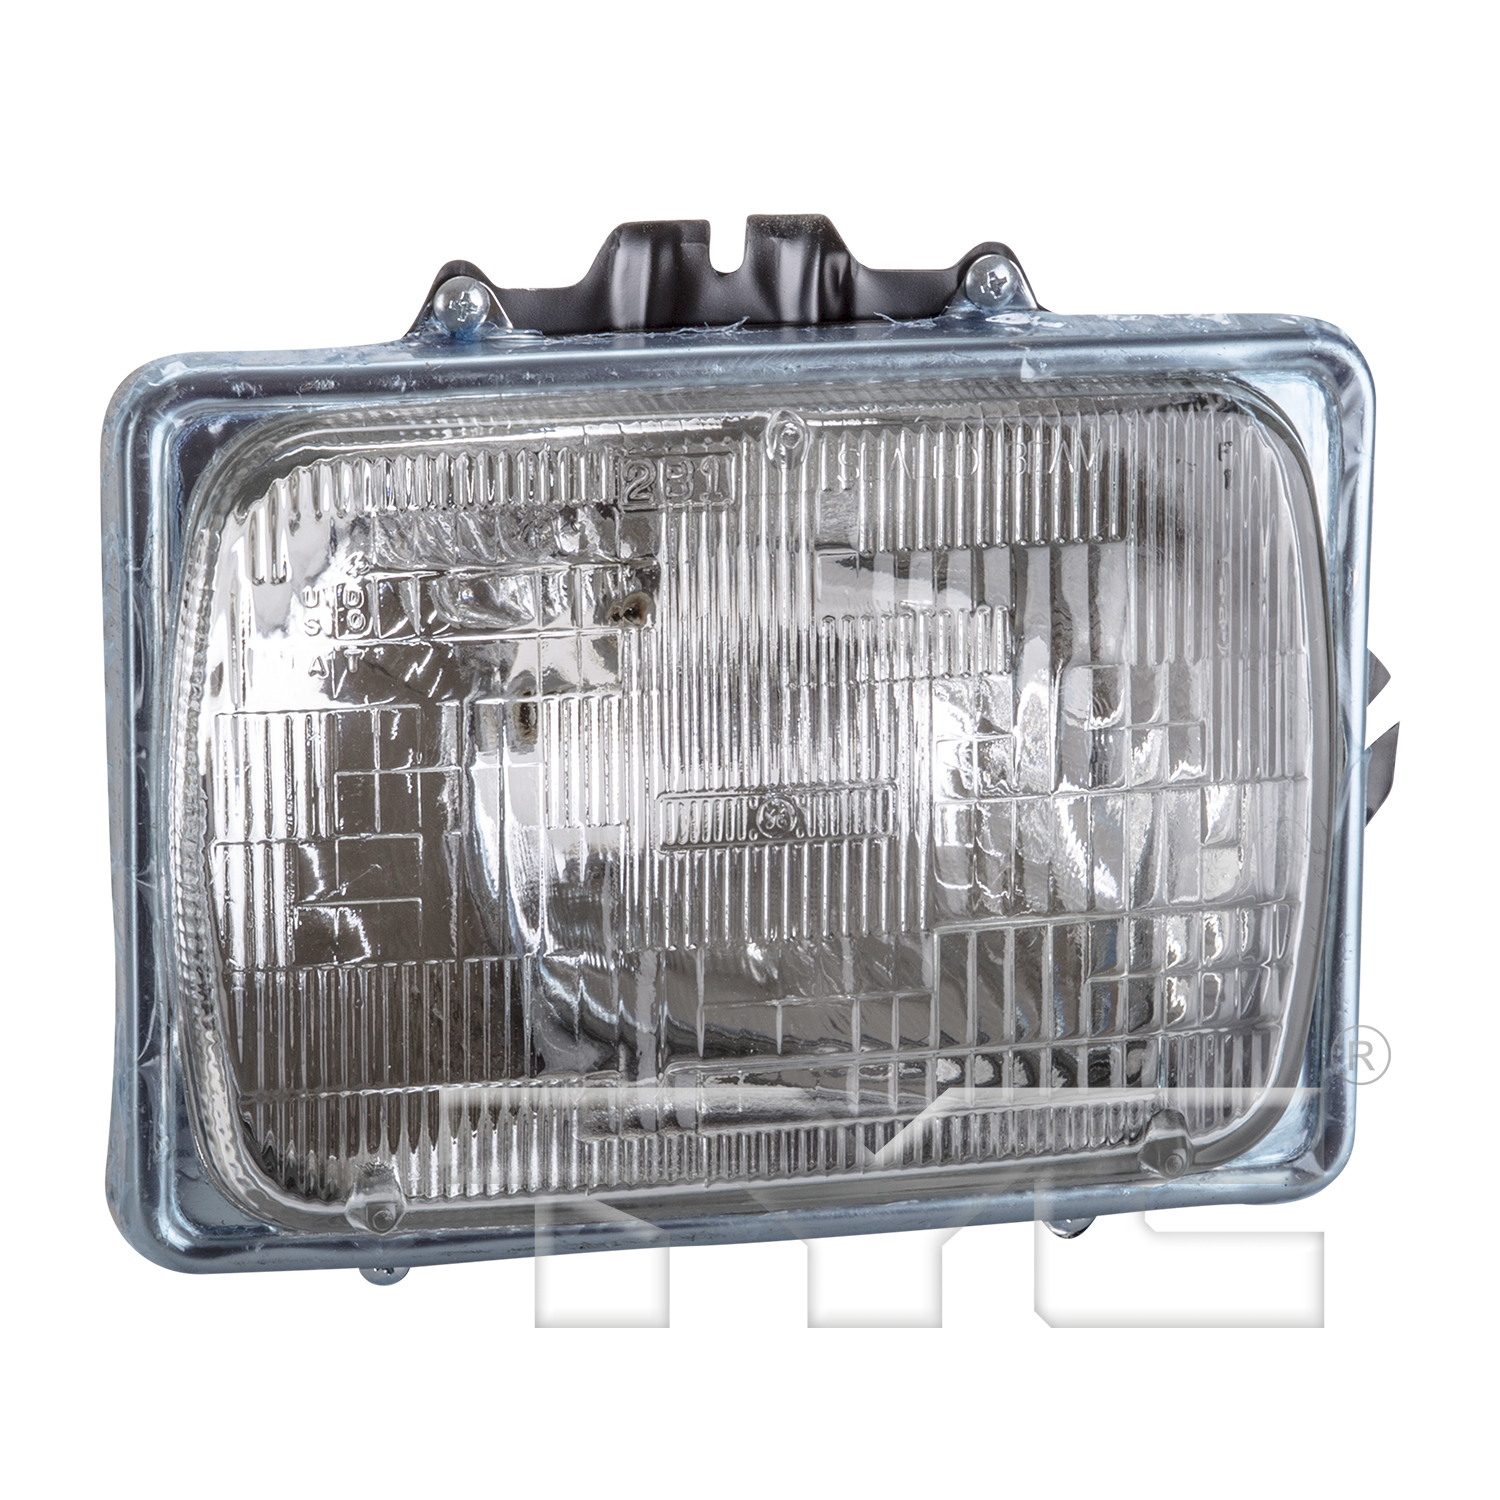 Aftermarket HEADLIGHTS for FORD - E-350 ECONOLINE CLUB WAGON, E-350 ECONOLINE CLUB WAGON,92-02,RT Headlamp assy sealed beam